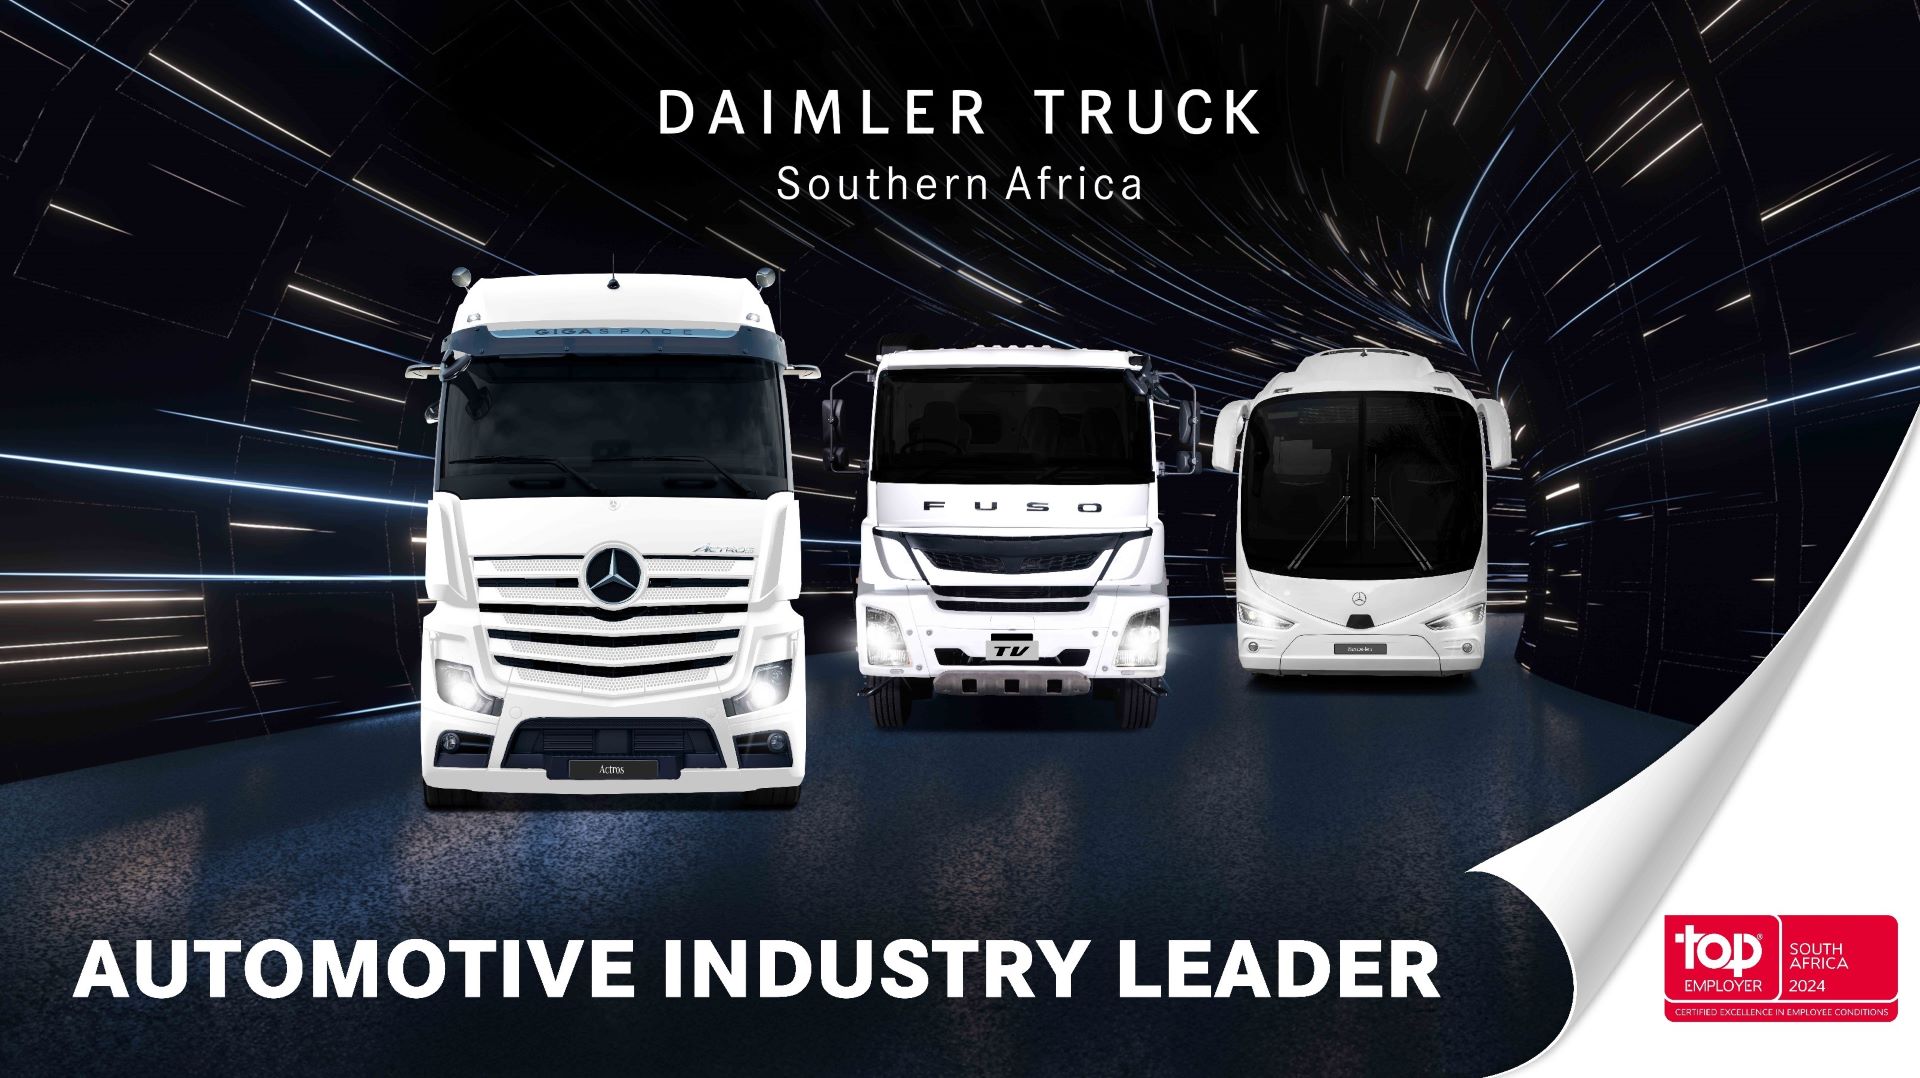 Daimler Truck Southern Africa does it again: Top Employer, Automotive Industry Leader 2024